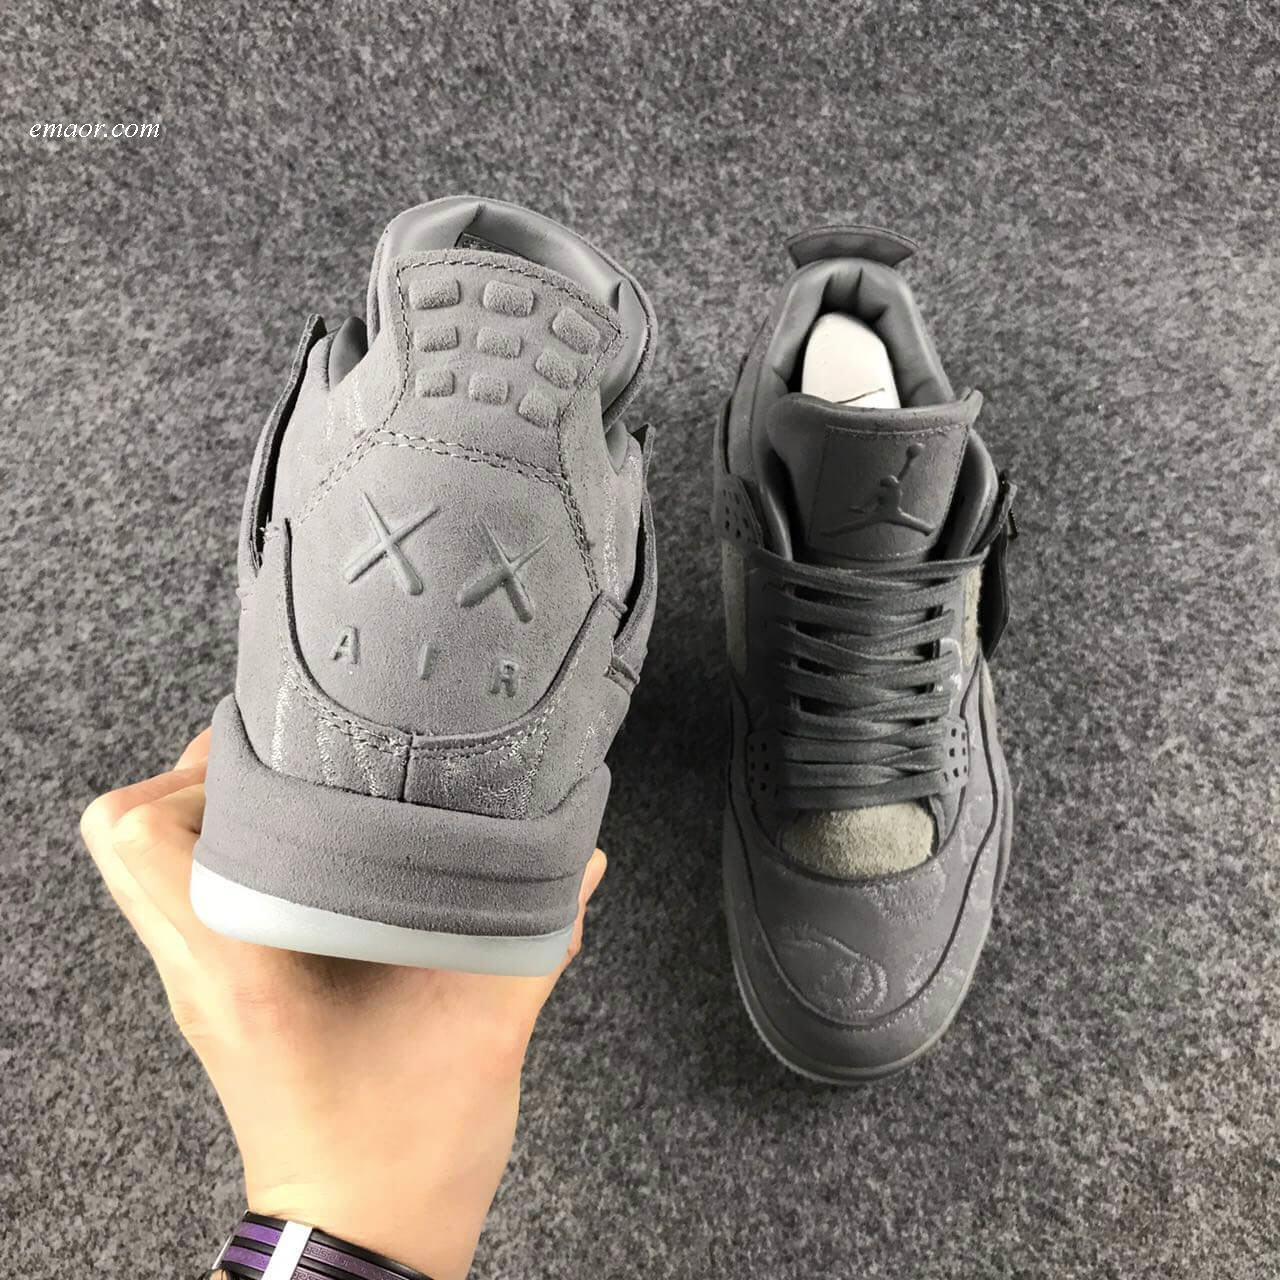  Self Lacing Basketball Shoes Retro Kaws Men's Basketball Shoes Sport Sneakers Athletic Designer Footwear Kawhi Leonard Shoes Self Lacing Basketball Shoes